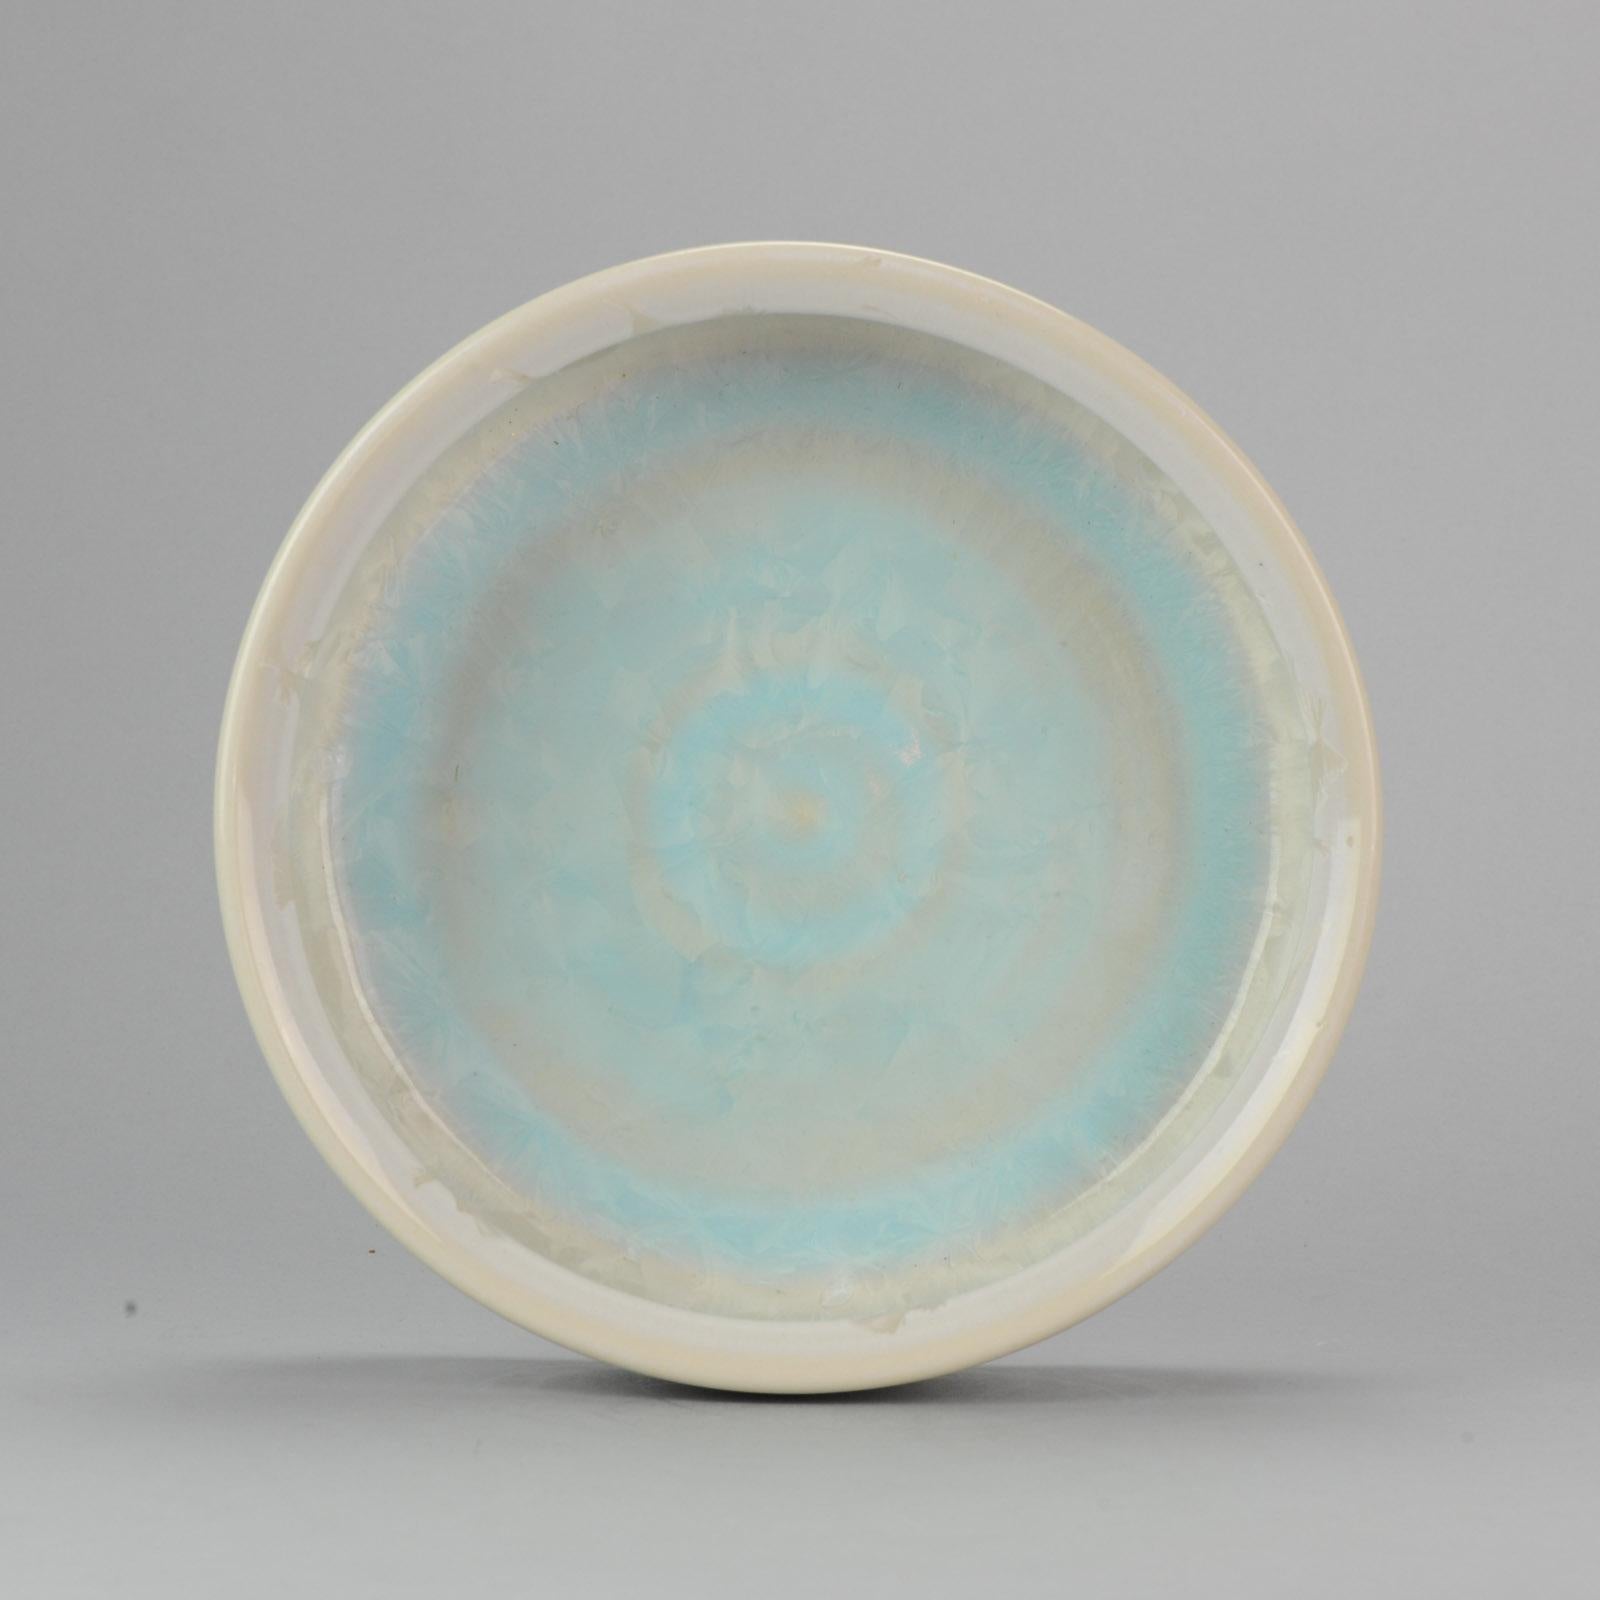 Very nice basin, high quality. Innovative crystalline glaze used in Shiwan in the 1970s-1980s. A true masterpiece. This is teh antique of the future.

Provenance: Bought in the 1980s in China. Afterwards exhibited and on loan to the Leiden Museum